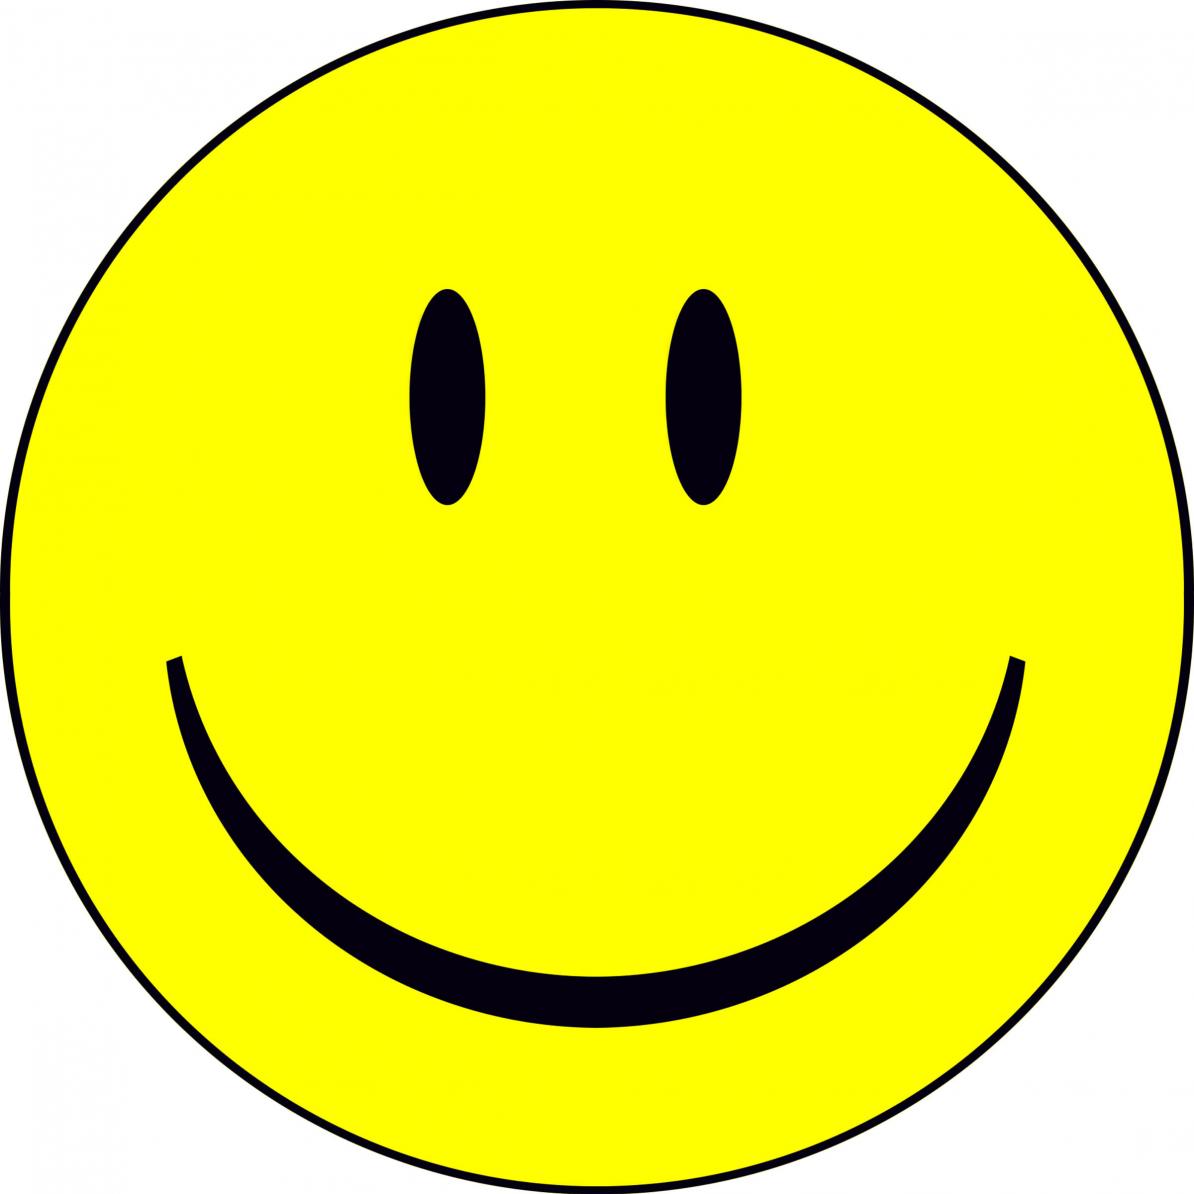 Kid smile clipart free clipart images